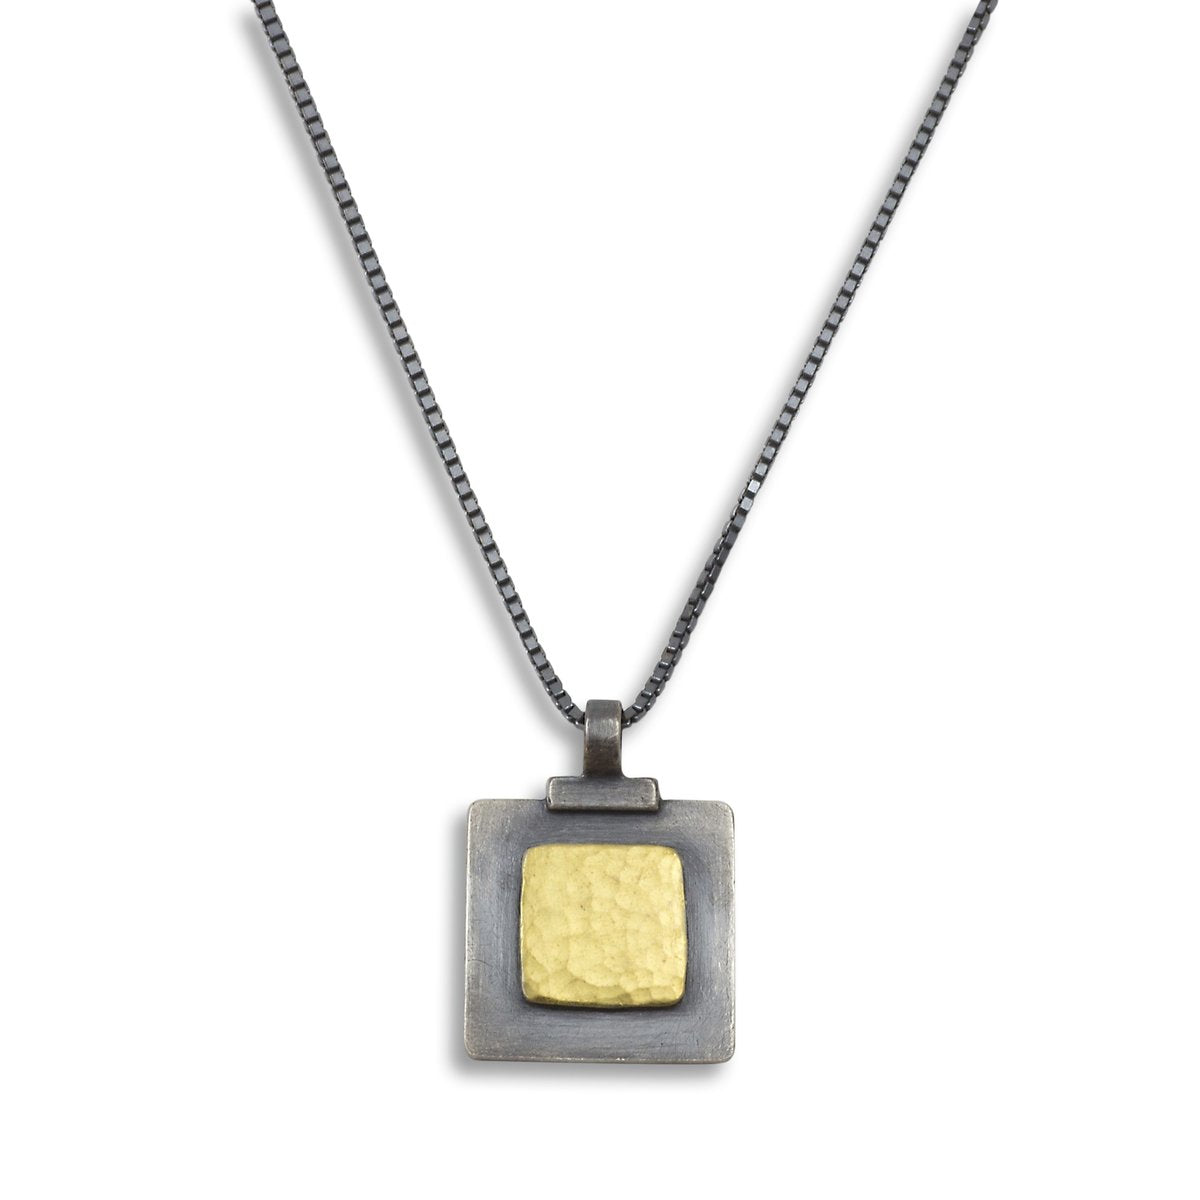 Nichole Collins - Square on Square with Fused 18k Gold Pendant Necklace